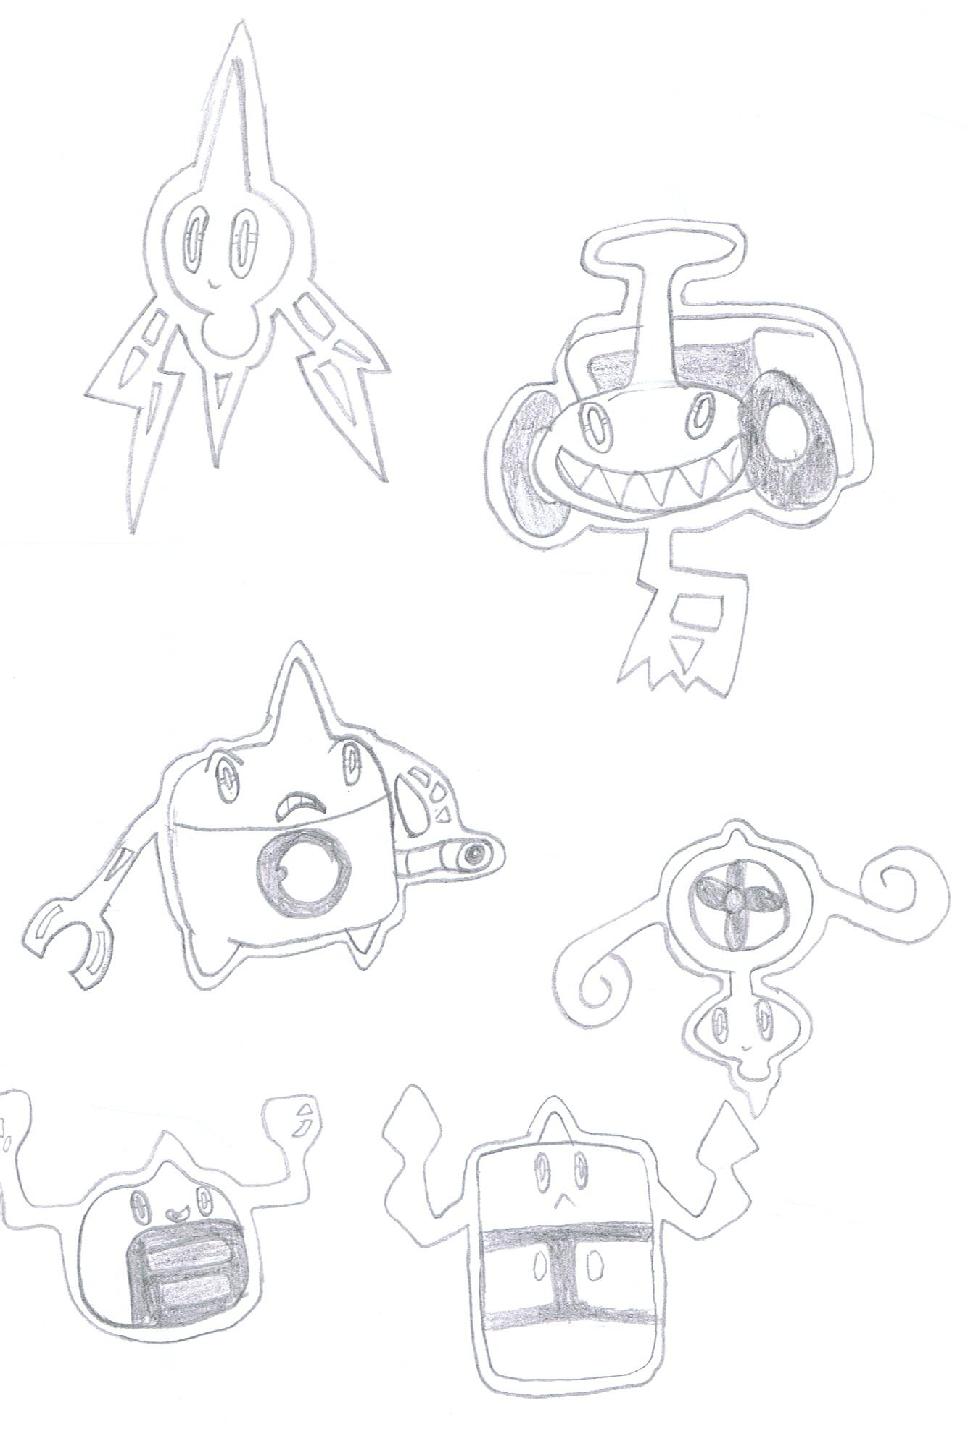 The forms of rotom by Tommy_the_hedgehog